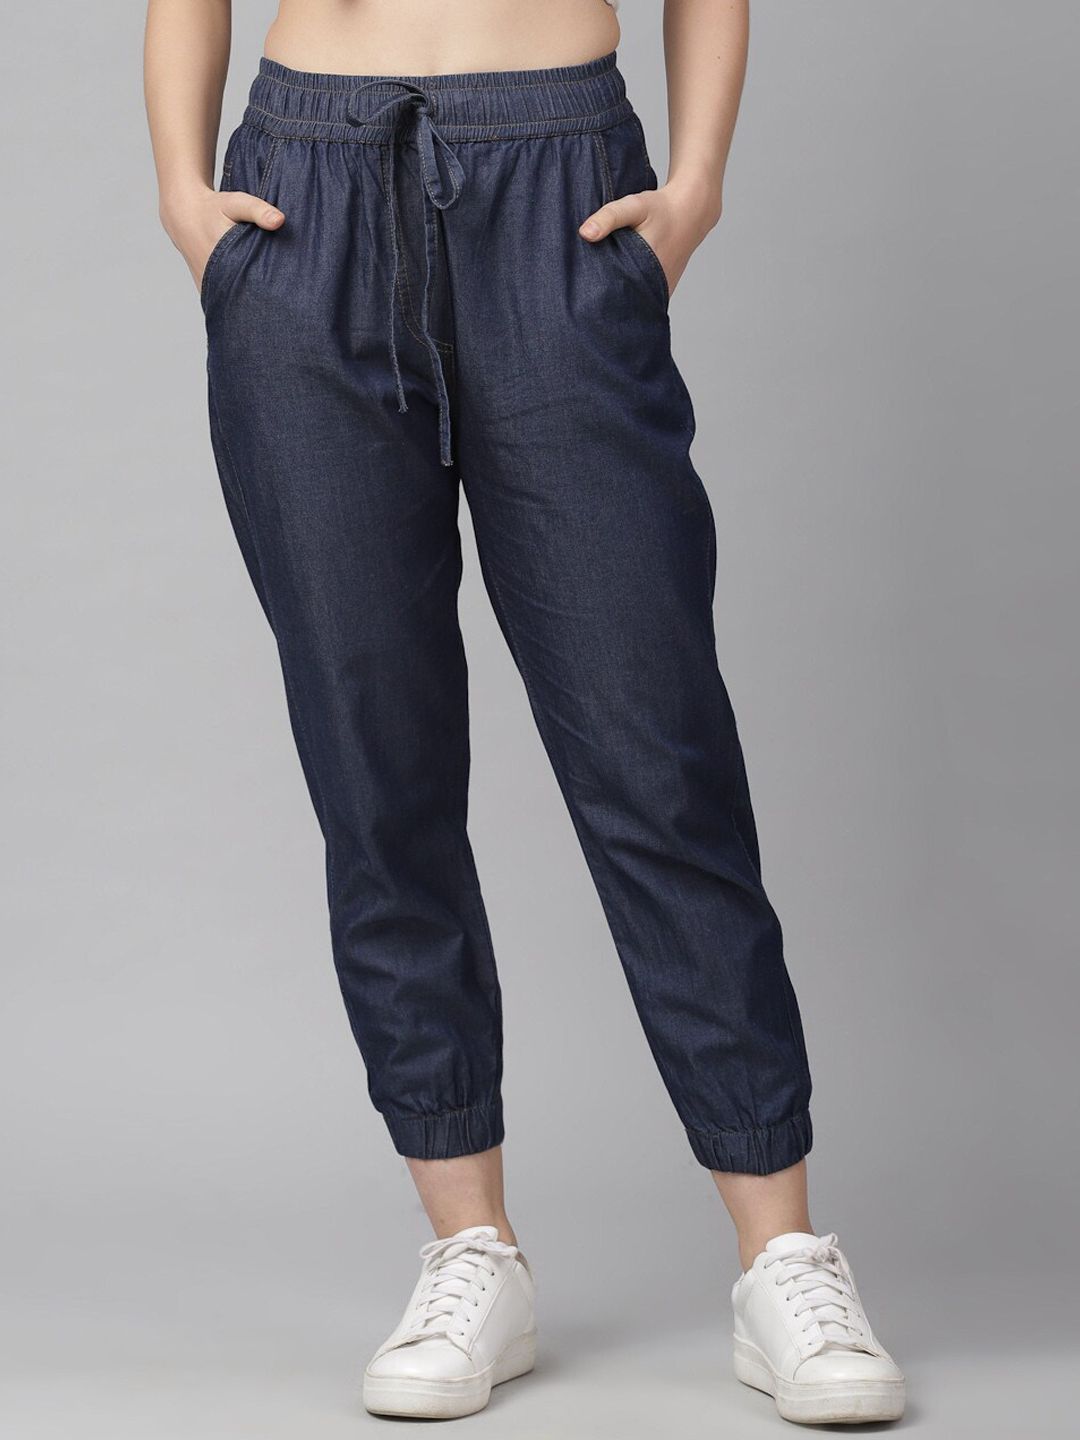 KASSUALLY Women Navy Blue Loose Fit Joggers Price in India